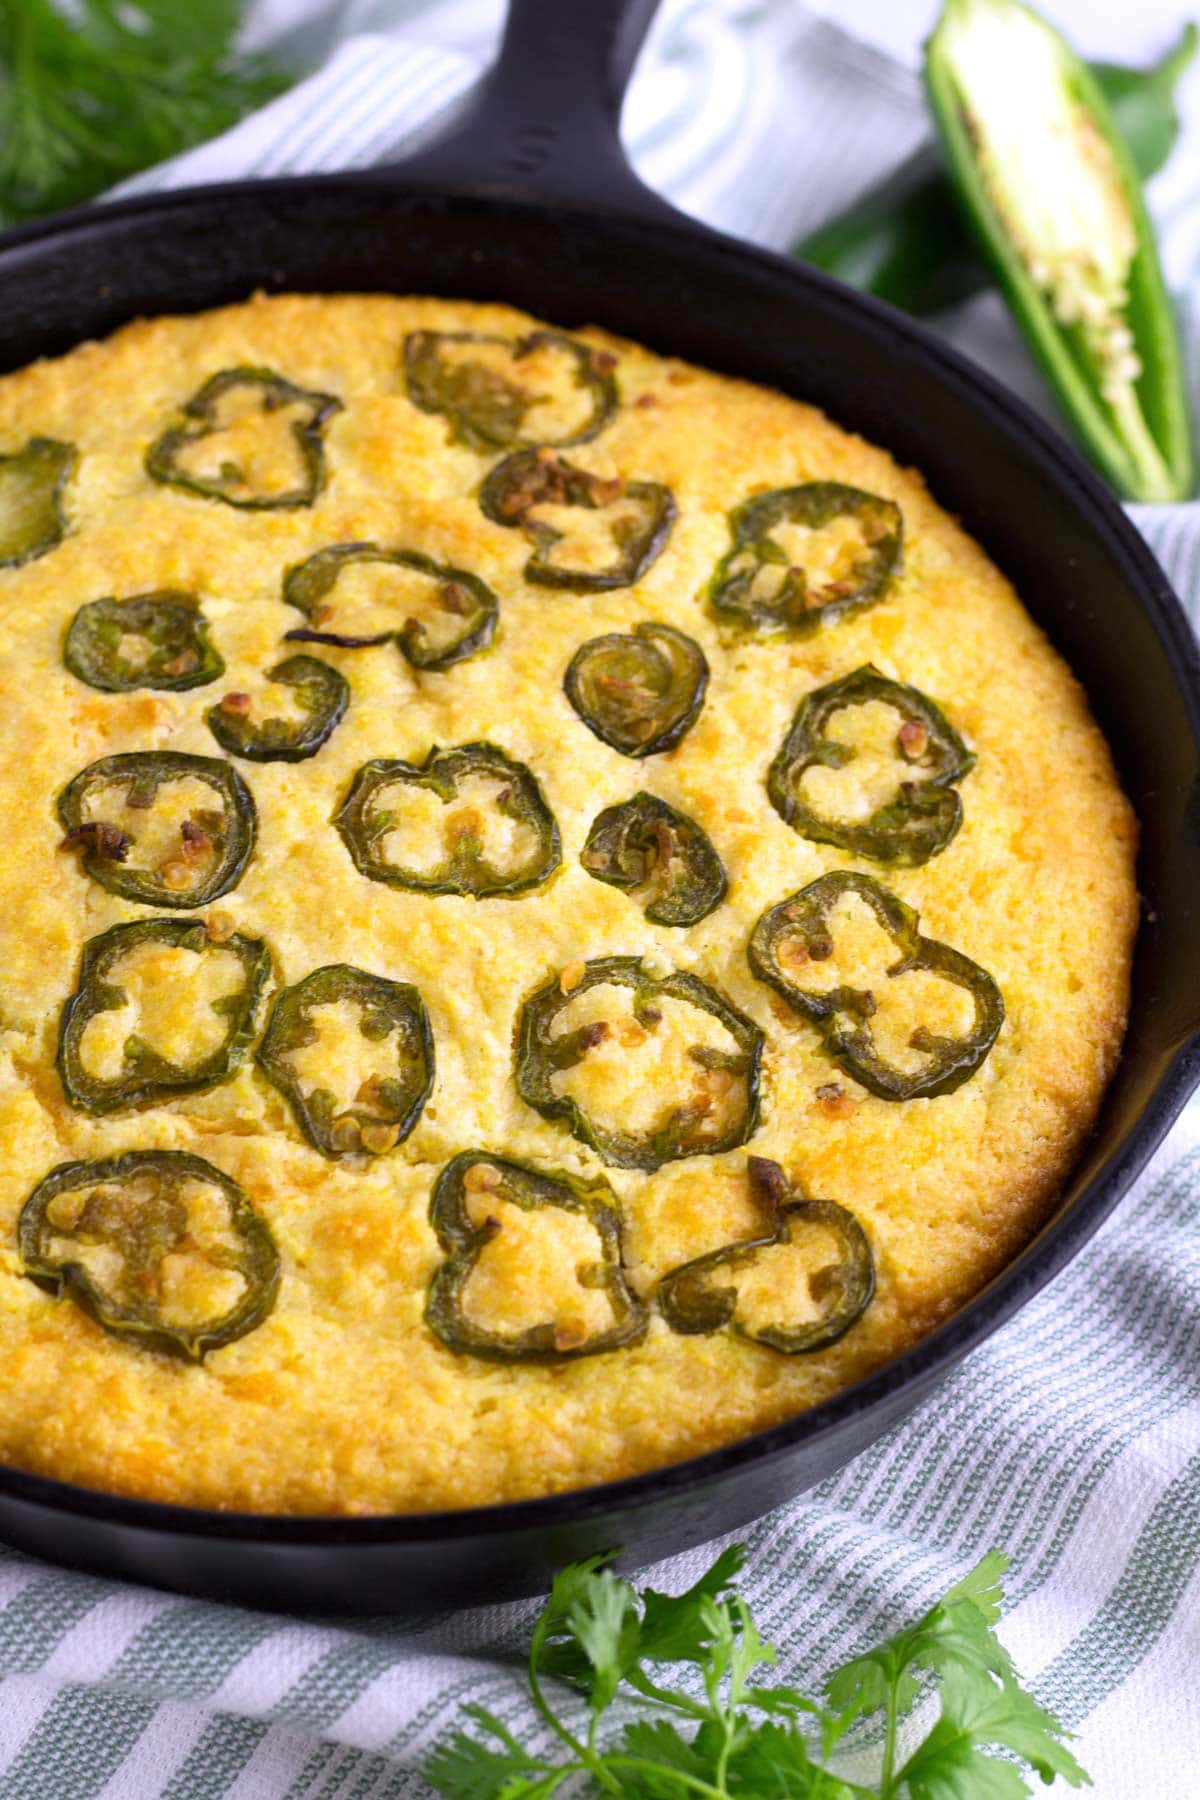 Partial pan of cornbread baked with jalapenos in pan.